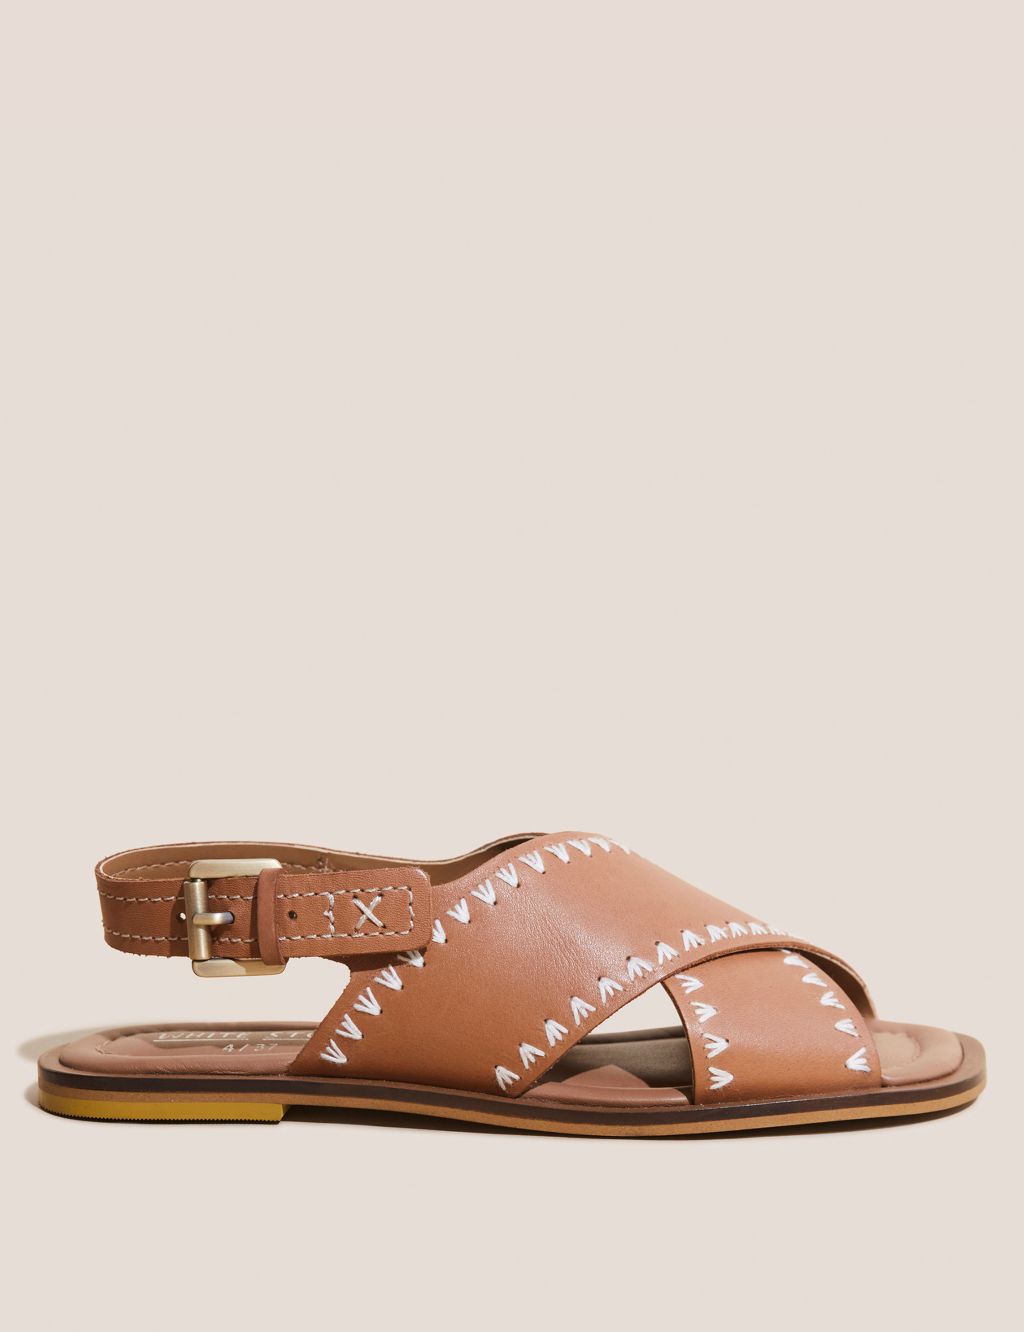 Leather Crossover Buckle Flat Sandals image 1